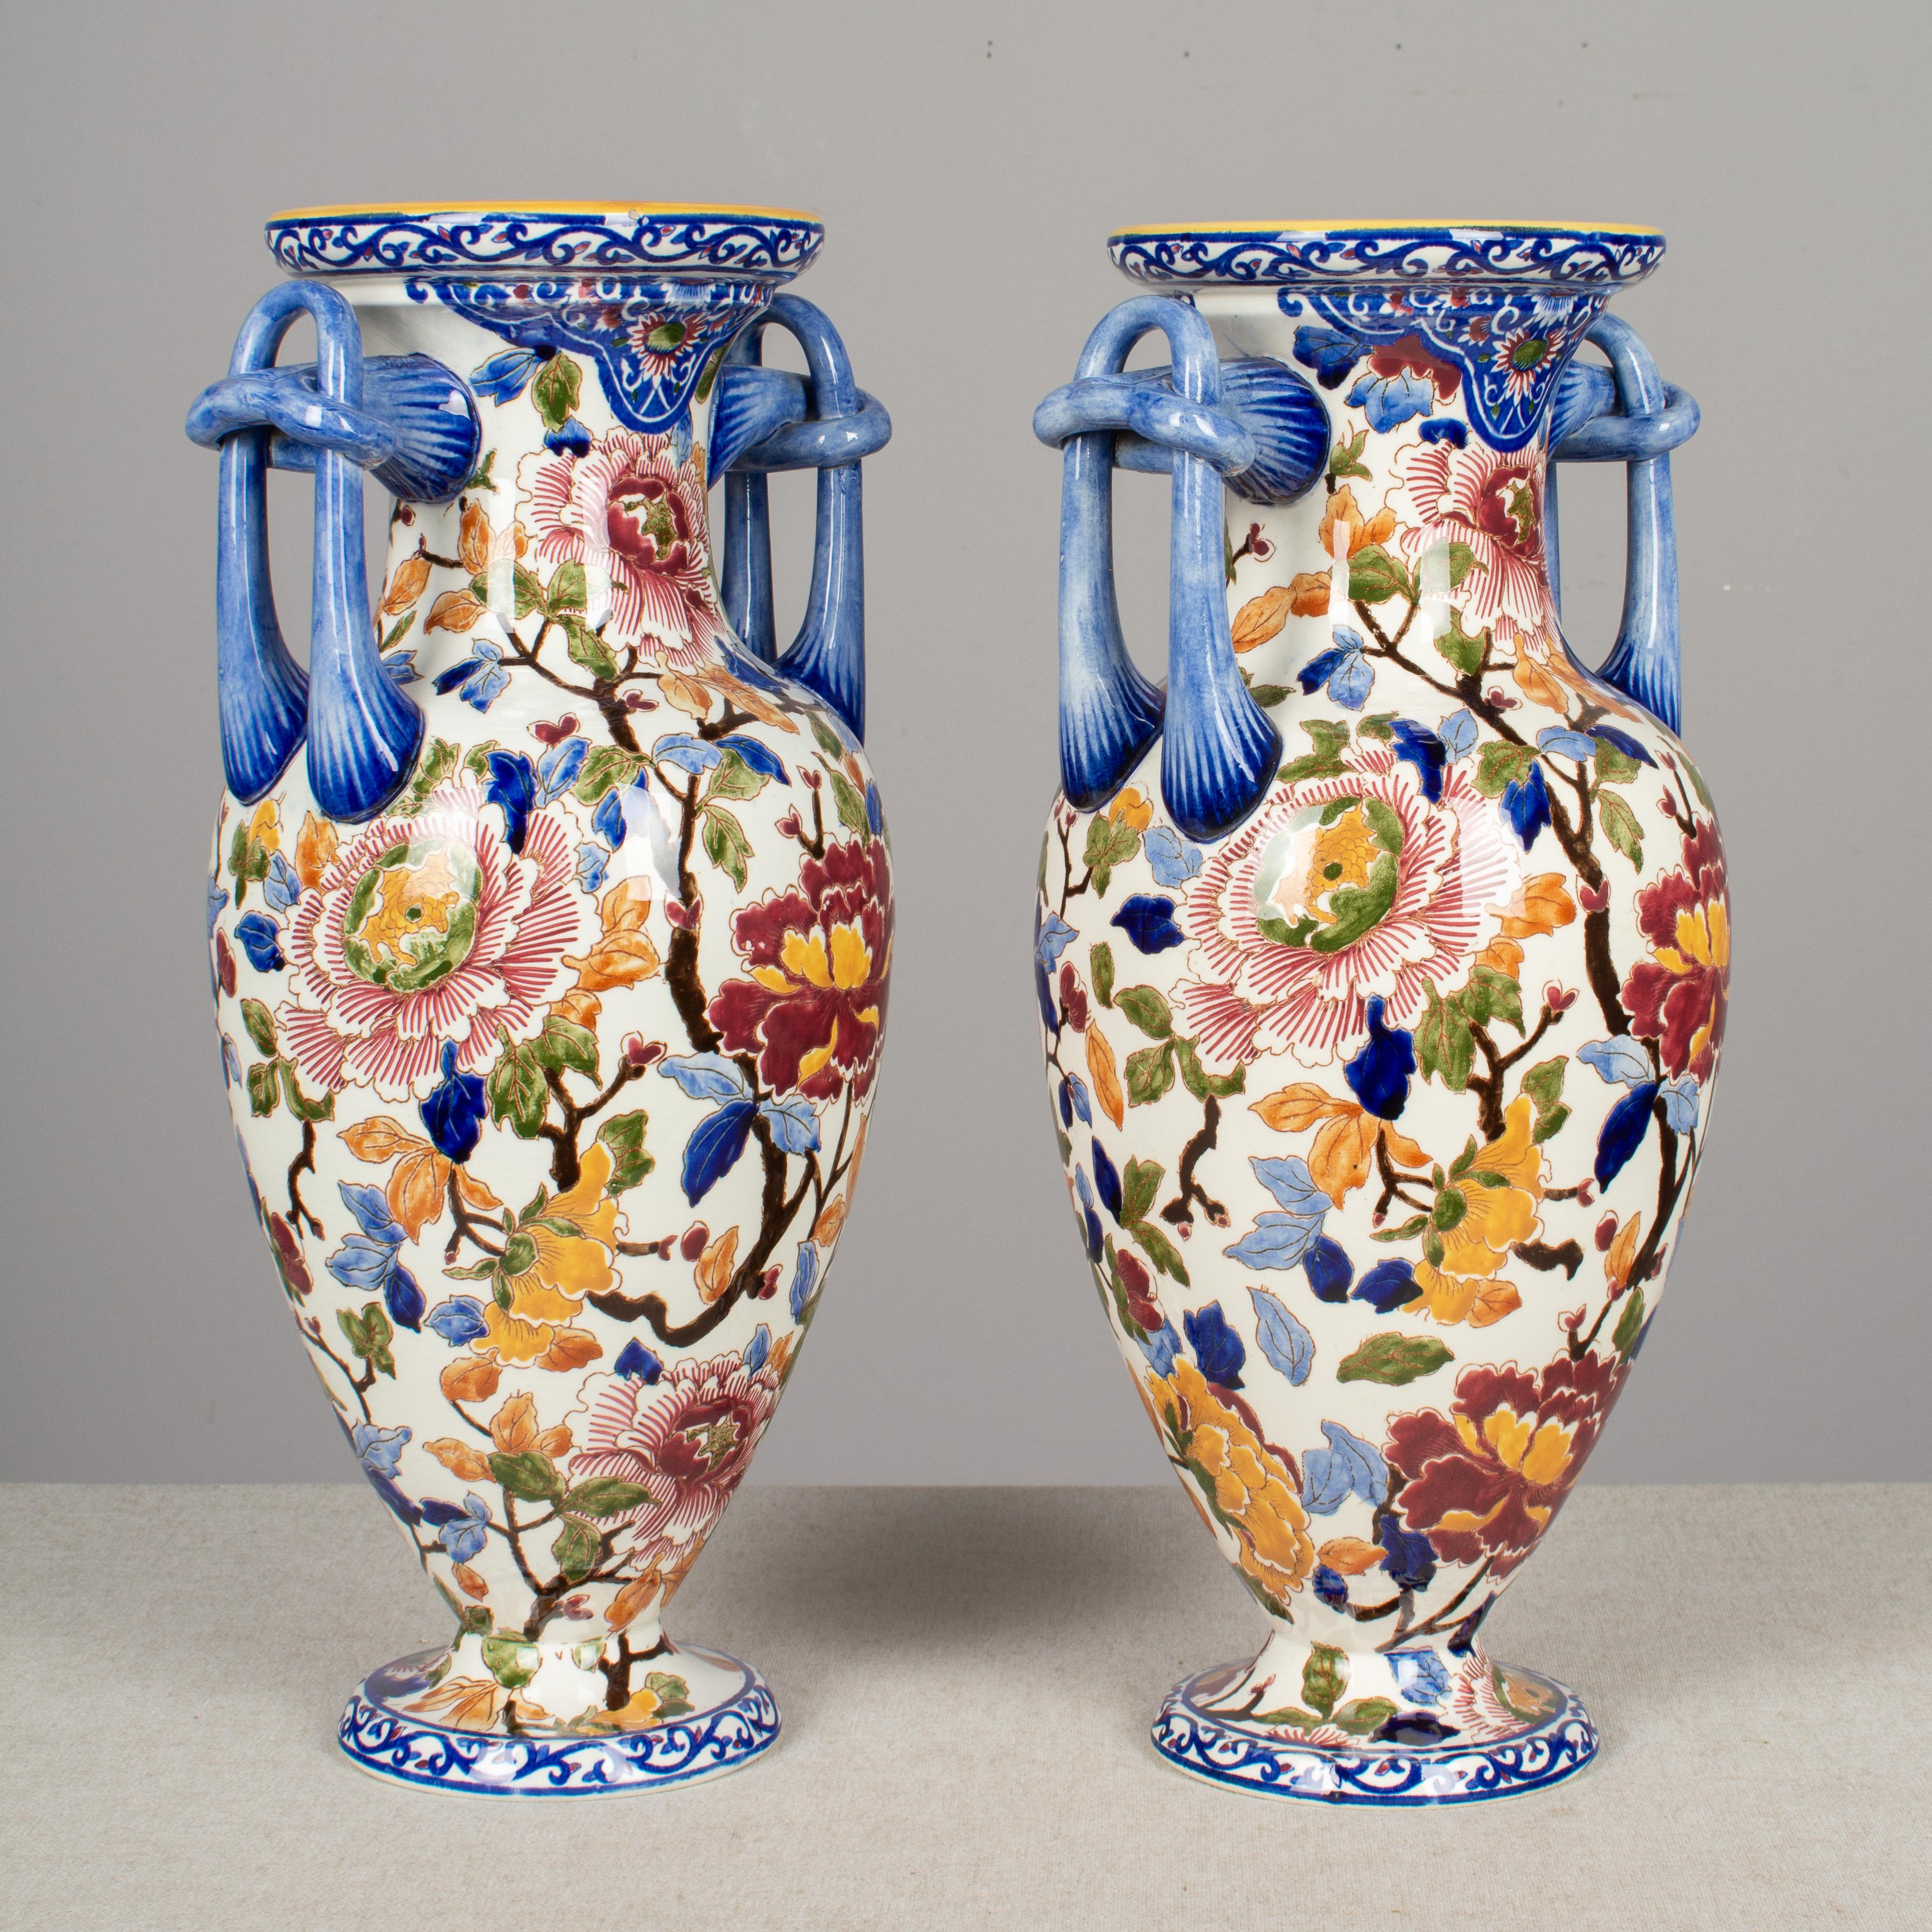 20th Century Pair of French Faience Gien Vases